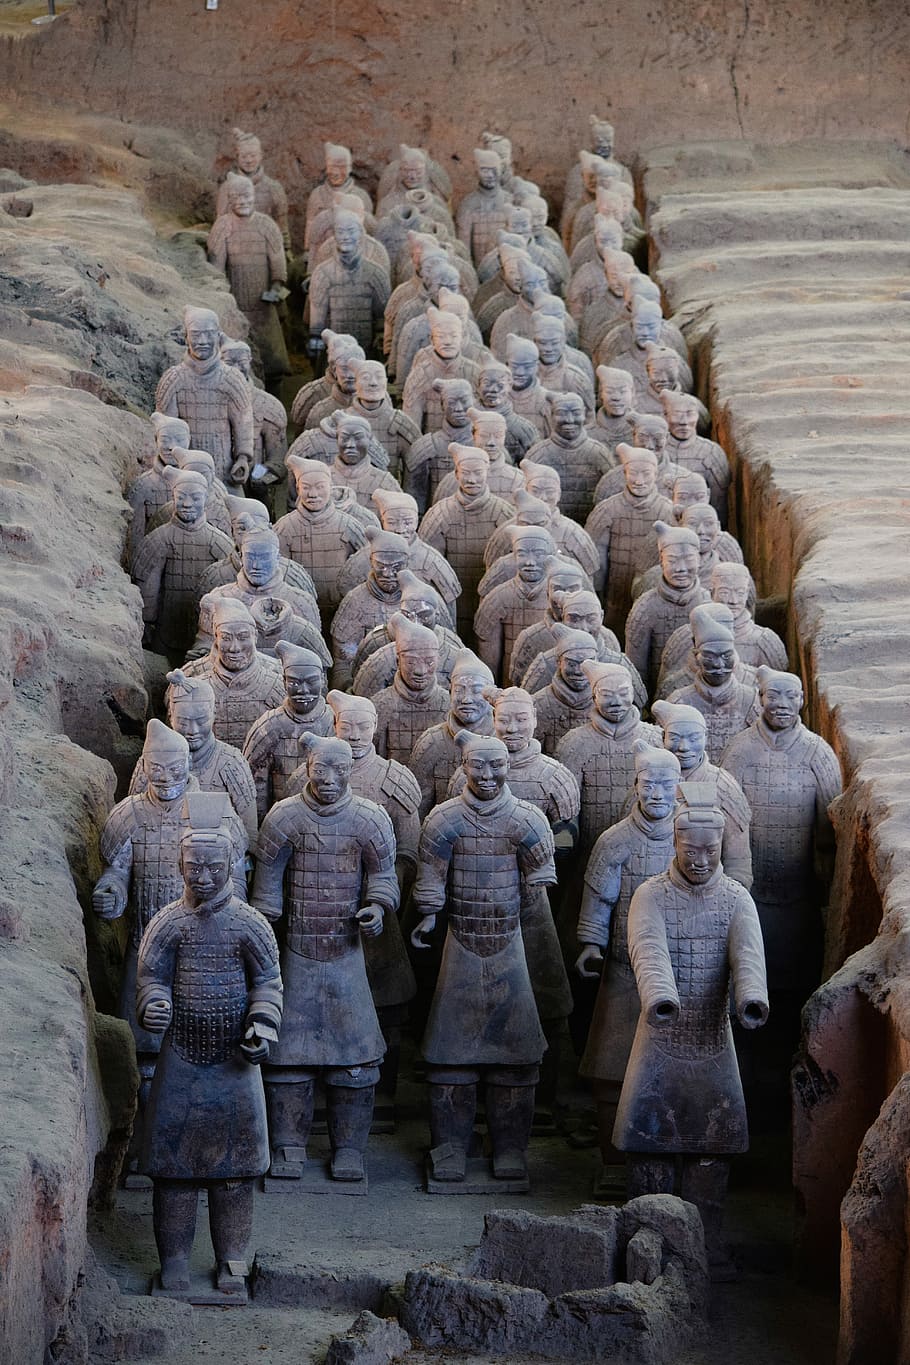 Terracotta Army statue, Terracotta Army, China, rock, warrier